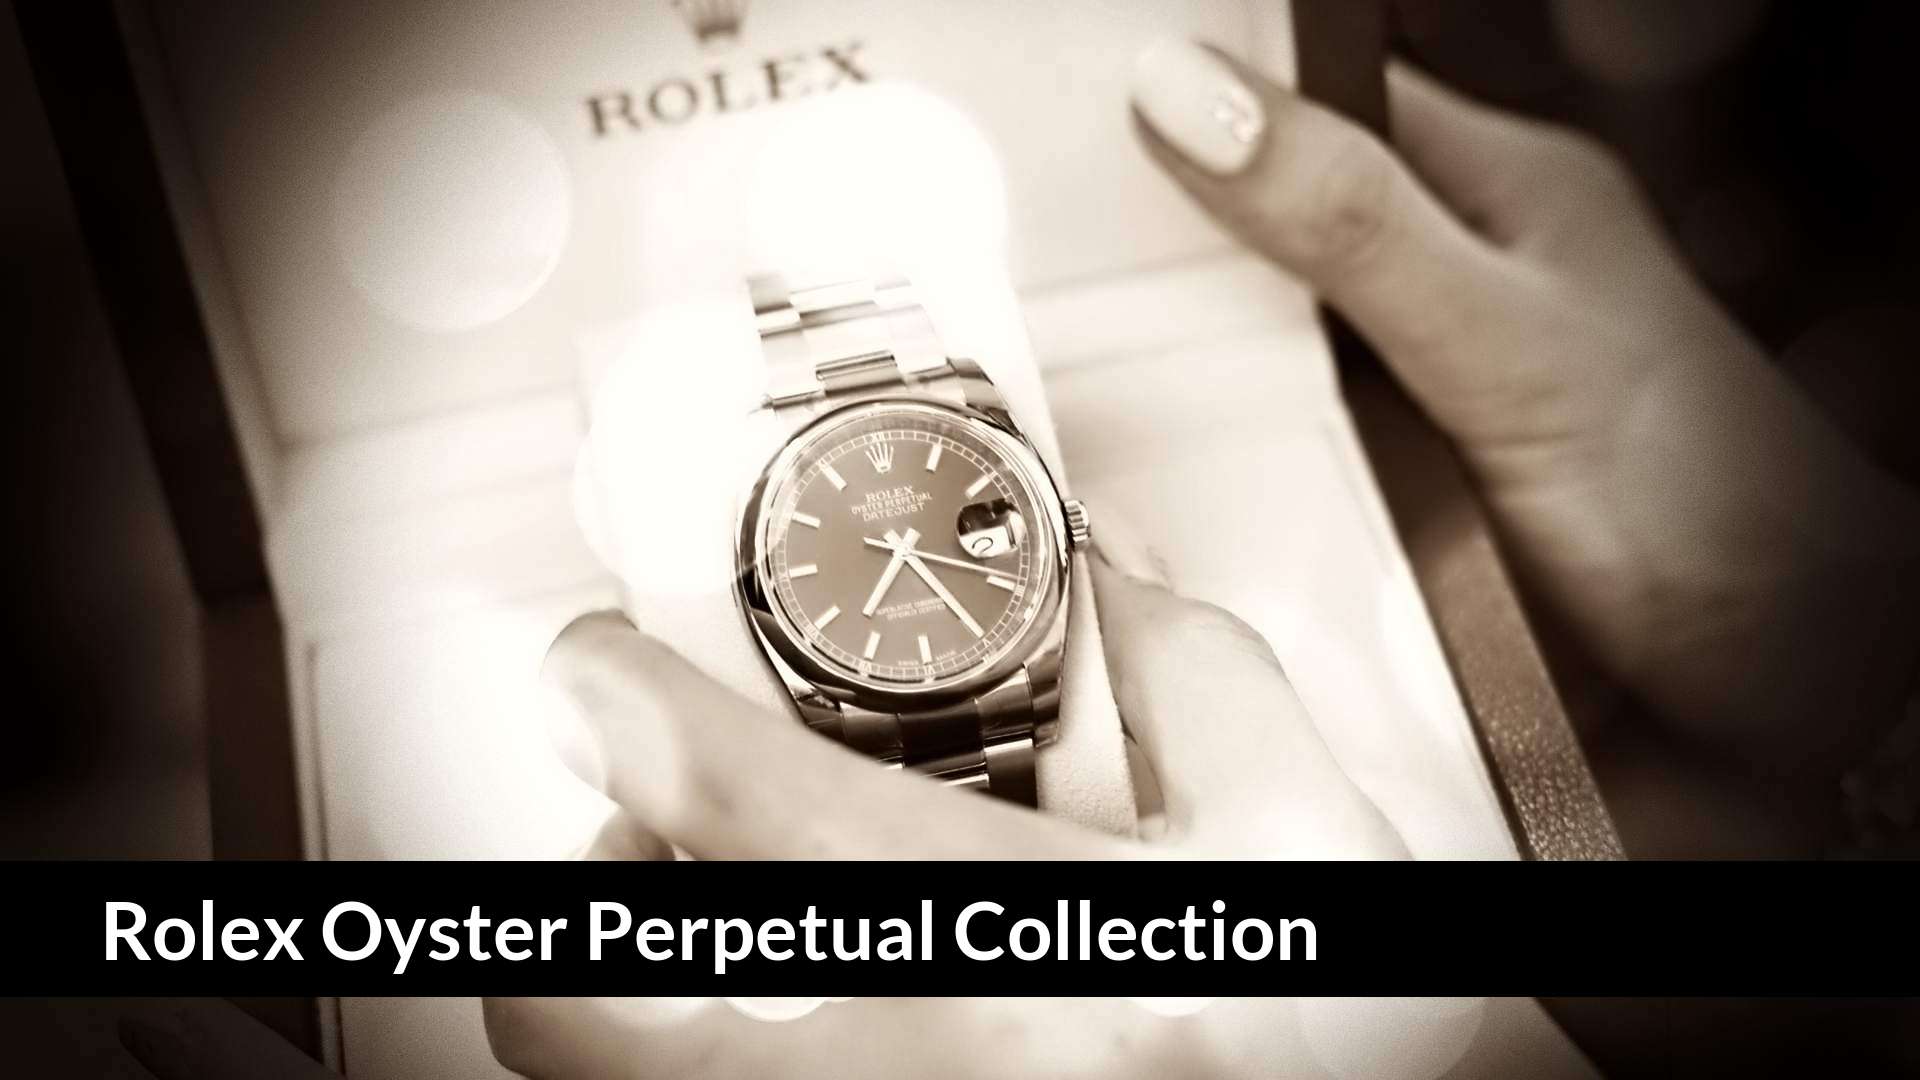 Rolex Oyster Perpetual Collection